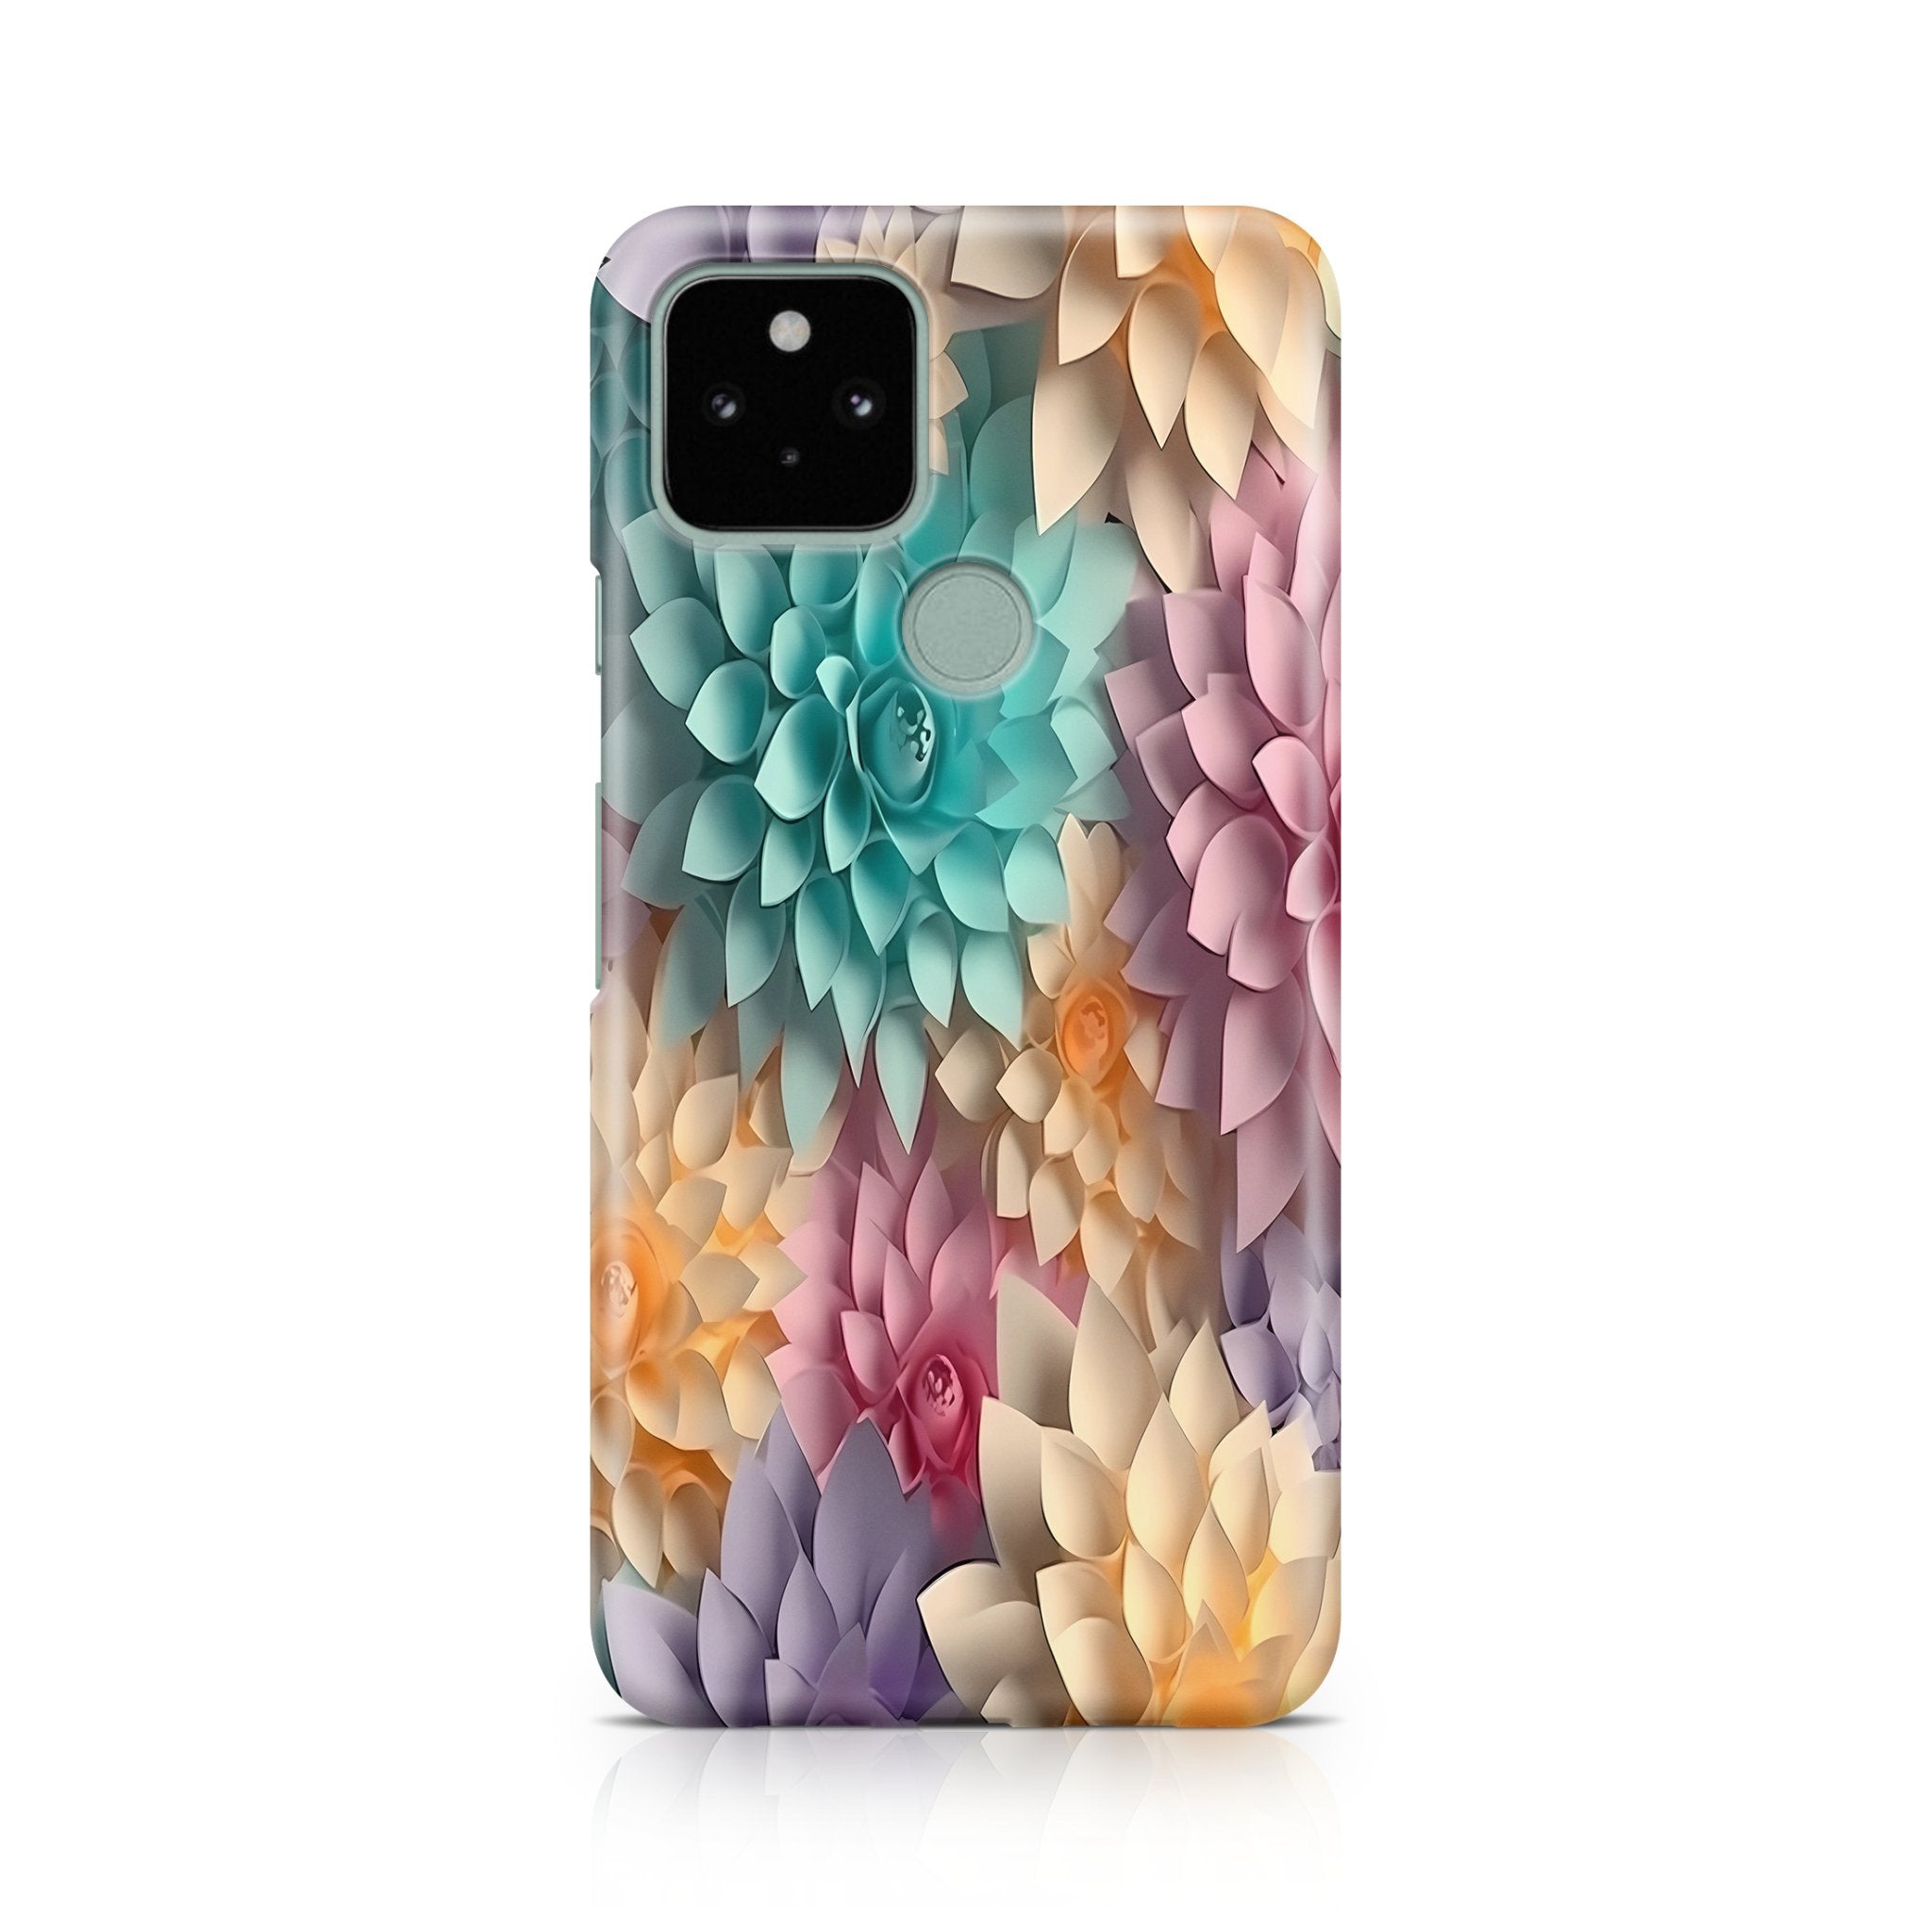 Pastel Symphony - Google phone case designs by CaseSwagger